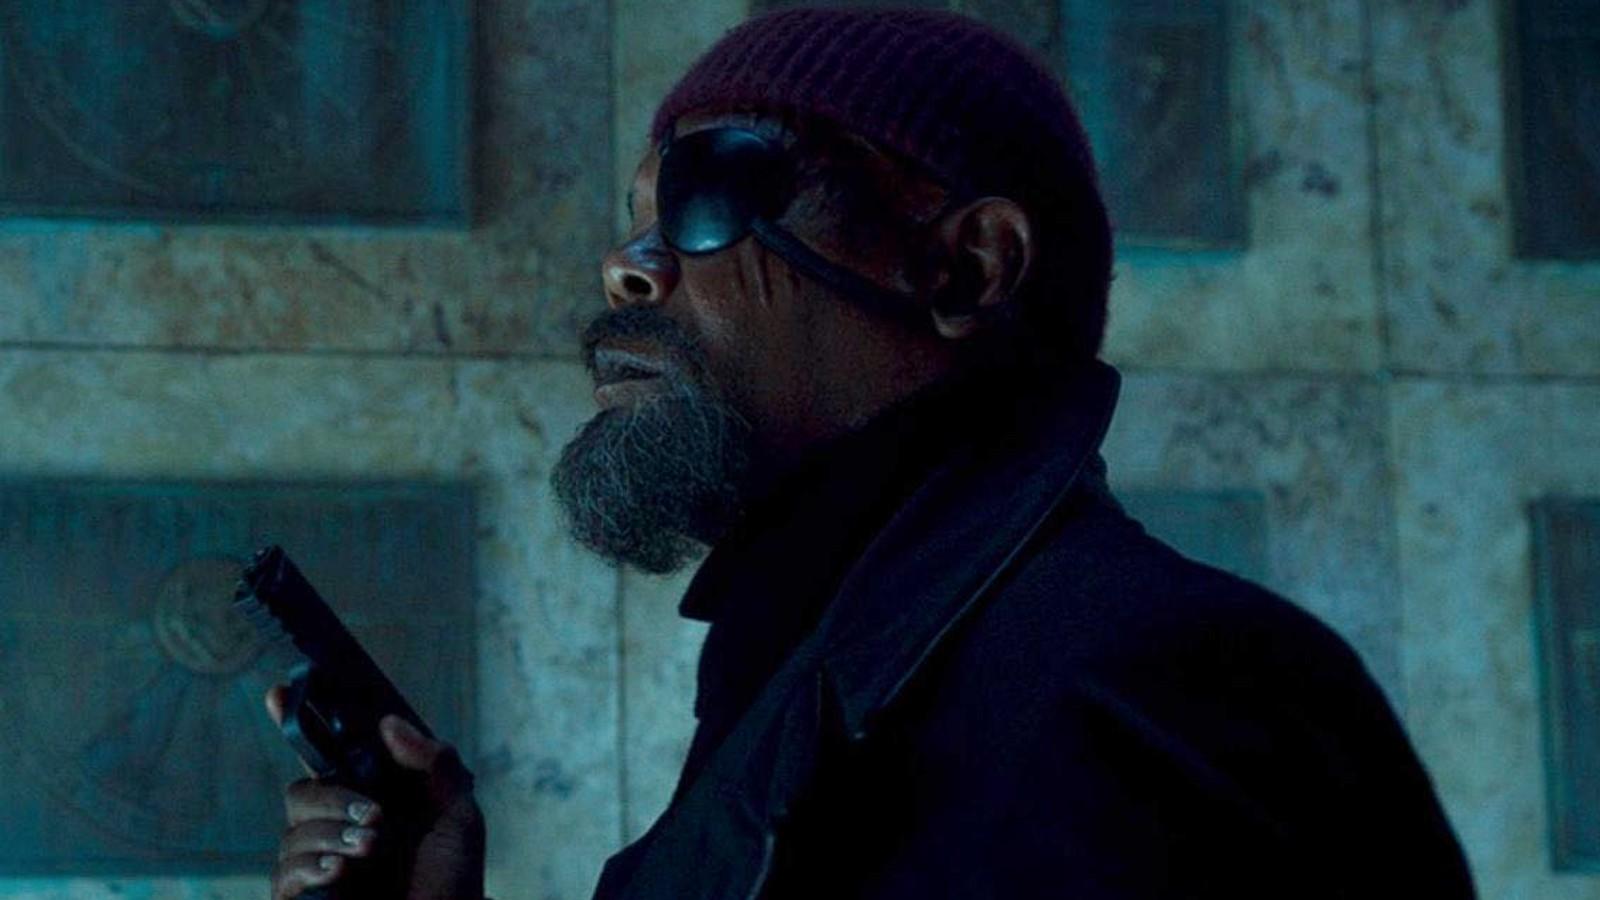 Secret Invasion' benefits from Samuel L. Jackson, strong supporting cast